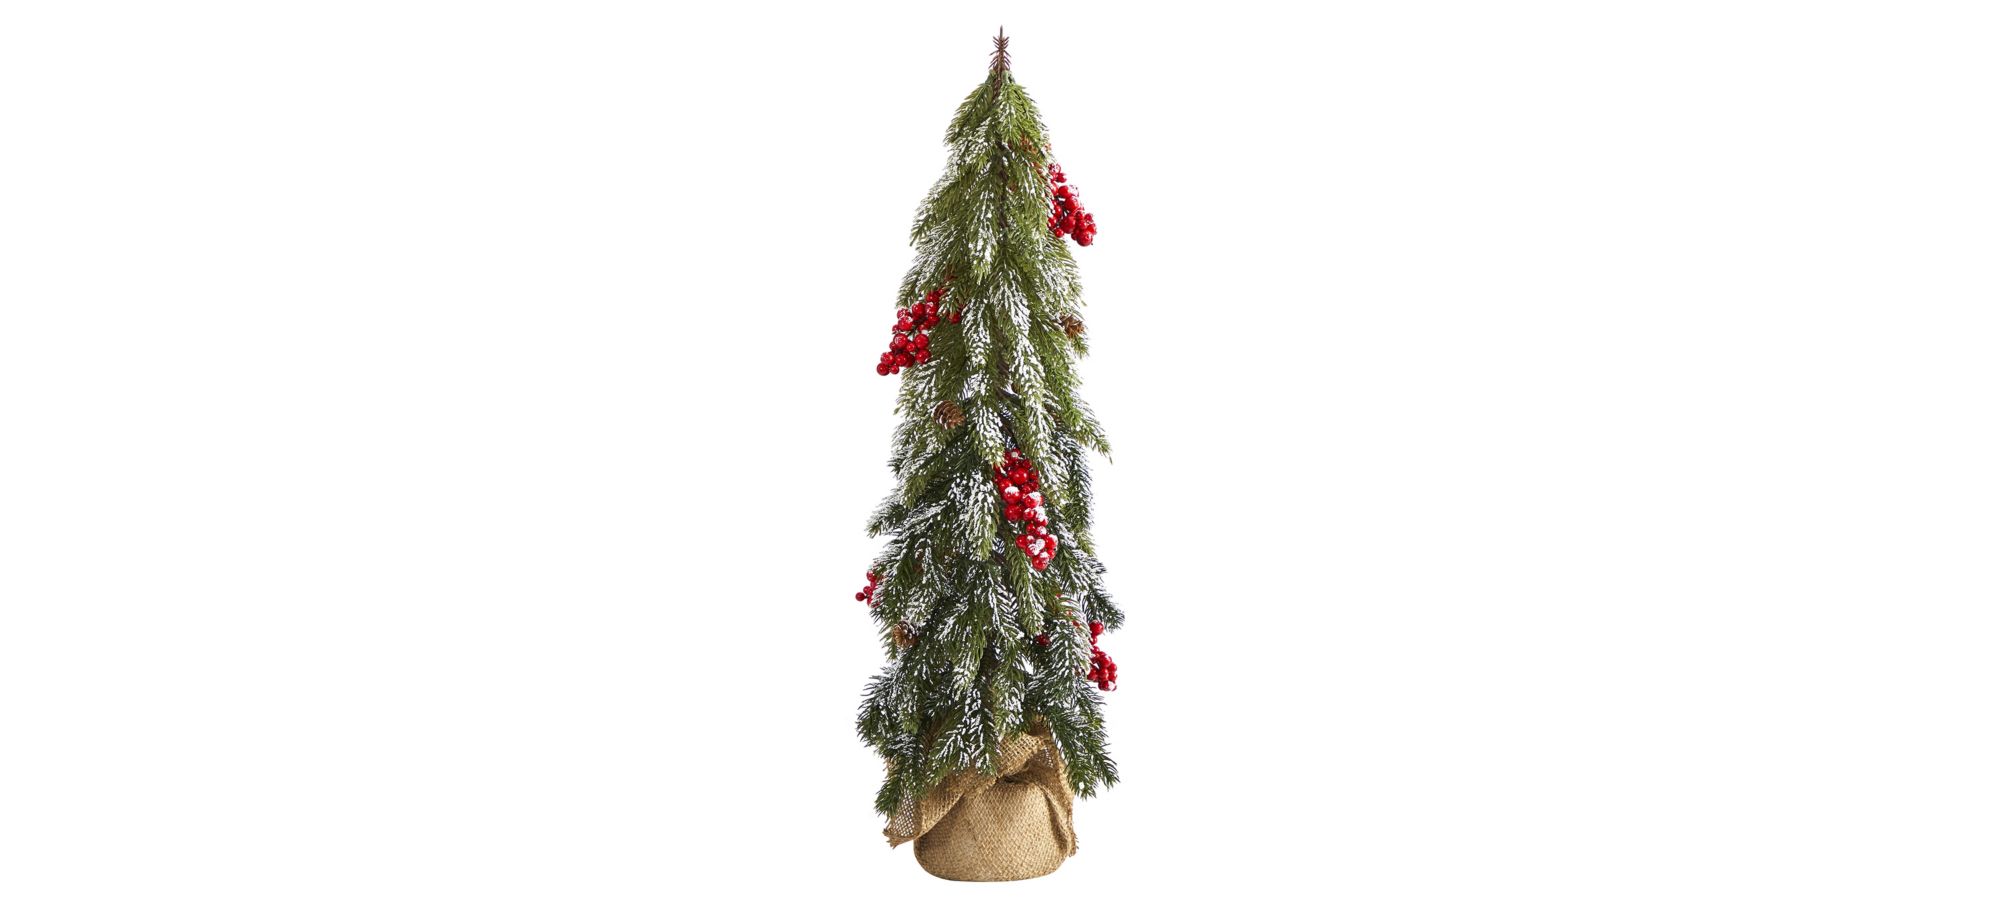 24in. Flocked Christmas Artificial Tree in Green by Bellanest